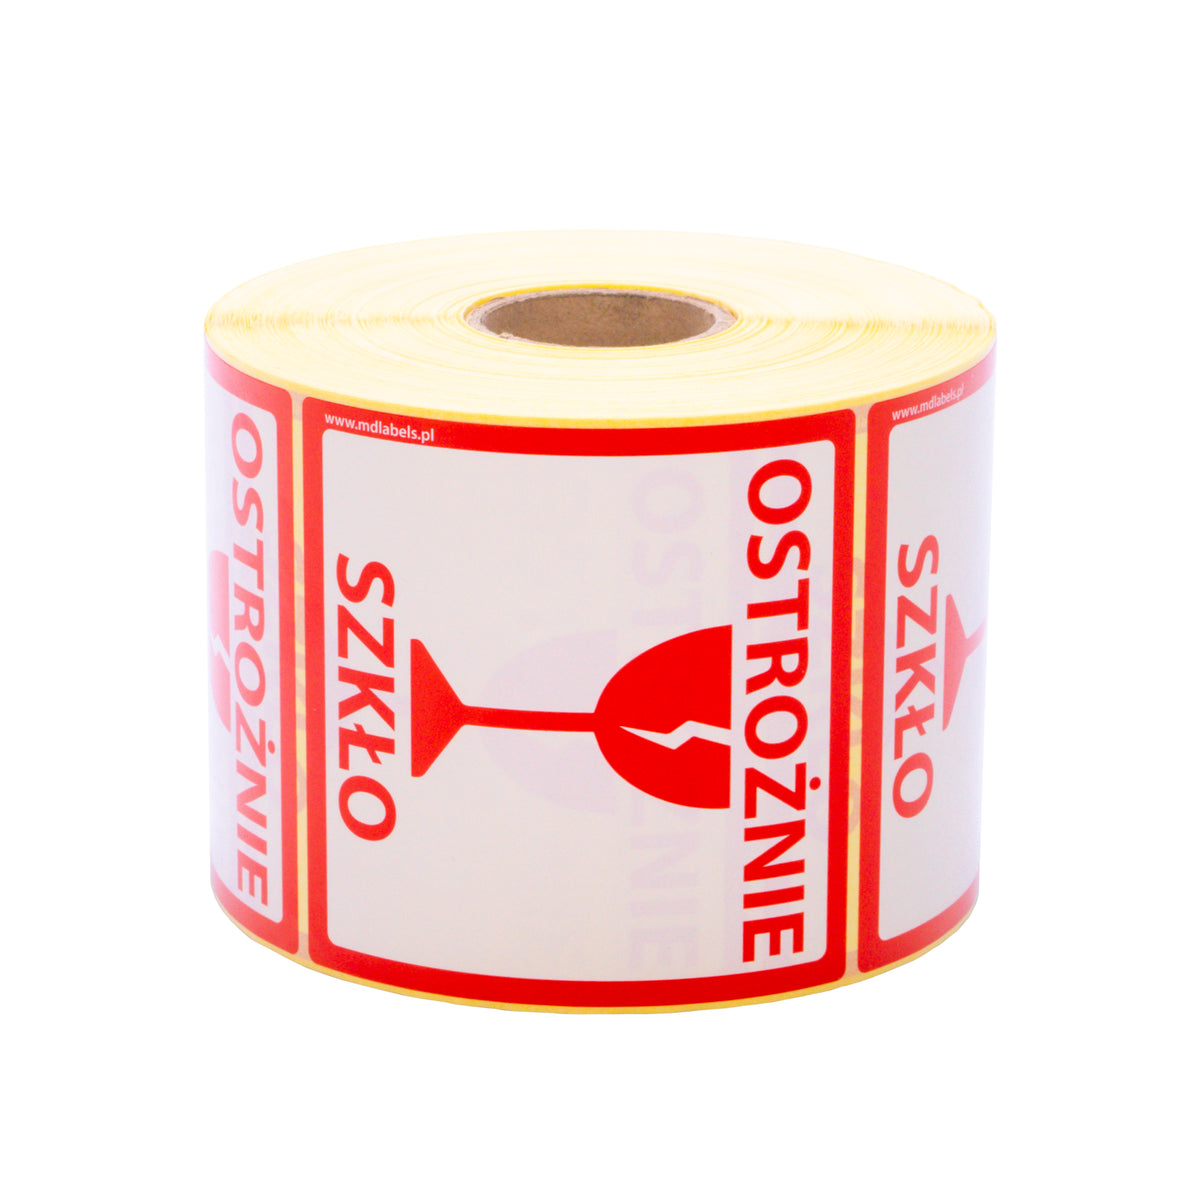 Self-adhesive warning labels - CAUTION GLASS - 98x98mm 1000 per roll